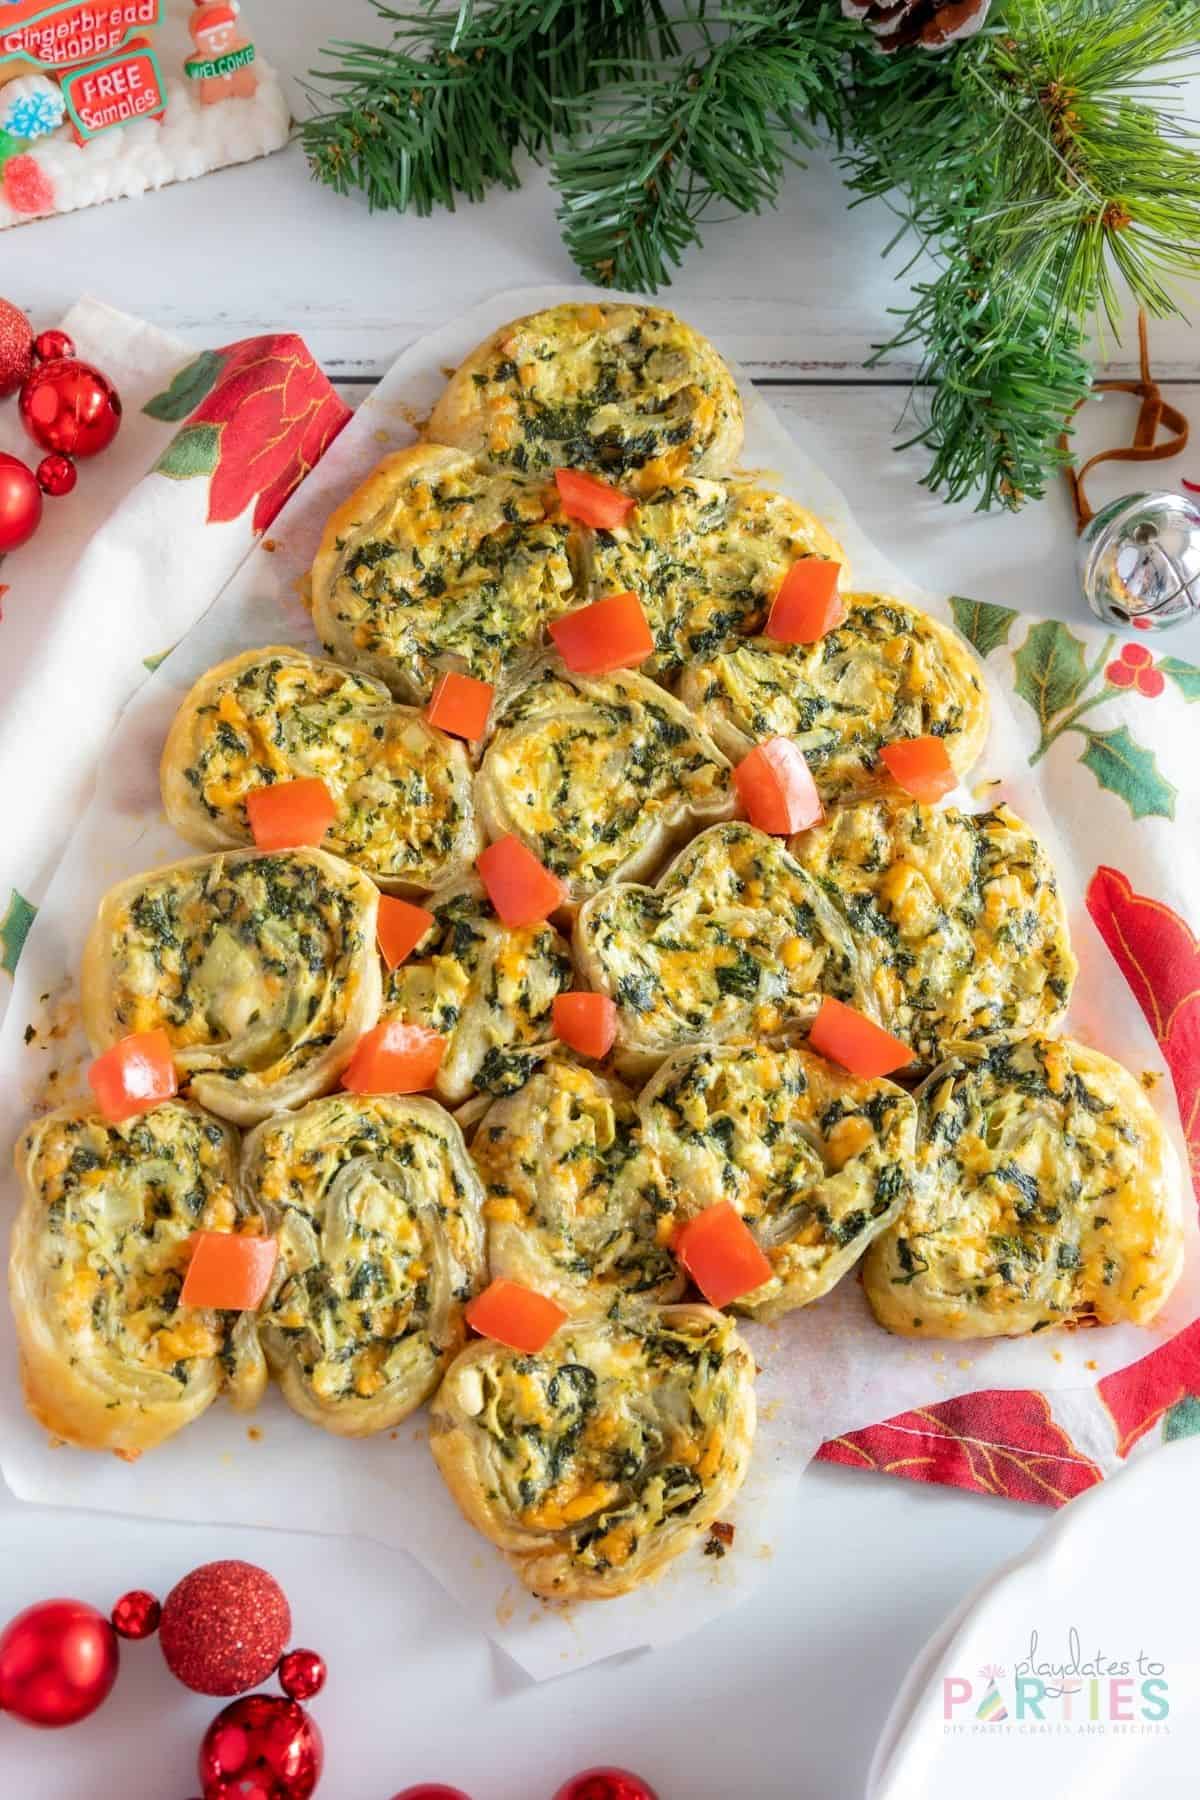 Overhead view of a spinach artichoke Christmas tree appetizer made with puff pastry.